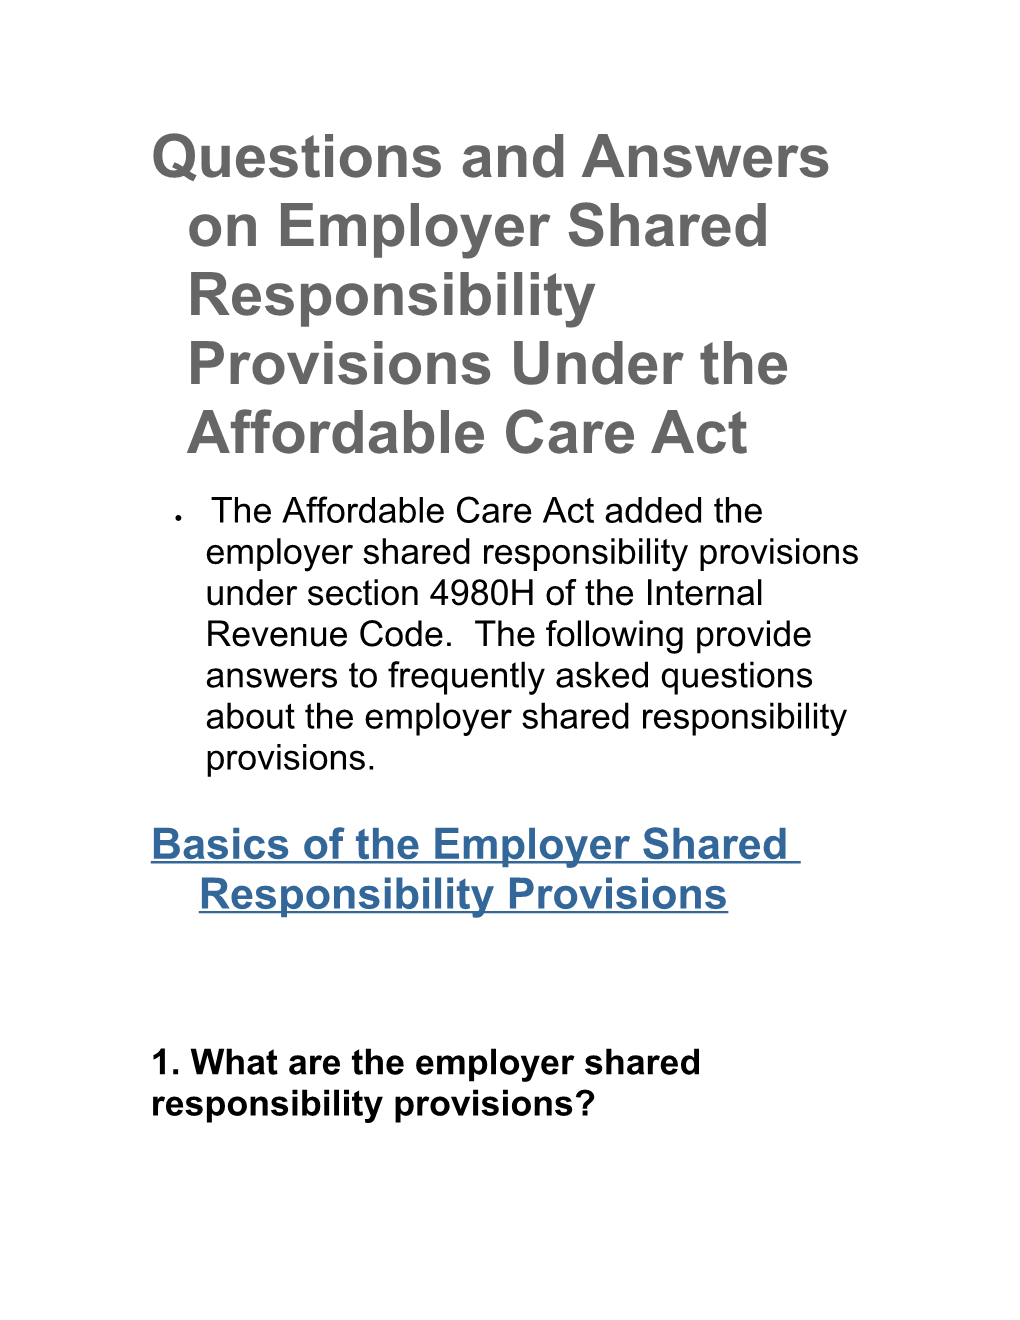 Questions and Answers on Employer Shared Responsibility Provisions Under the Affordable Care Act